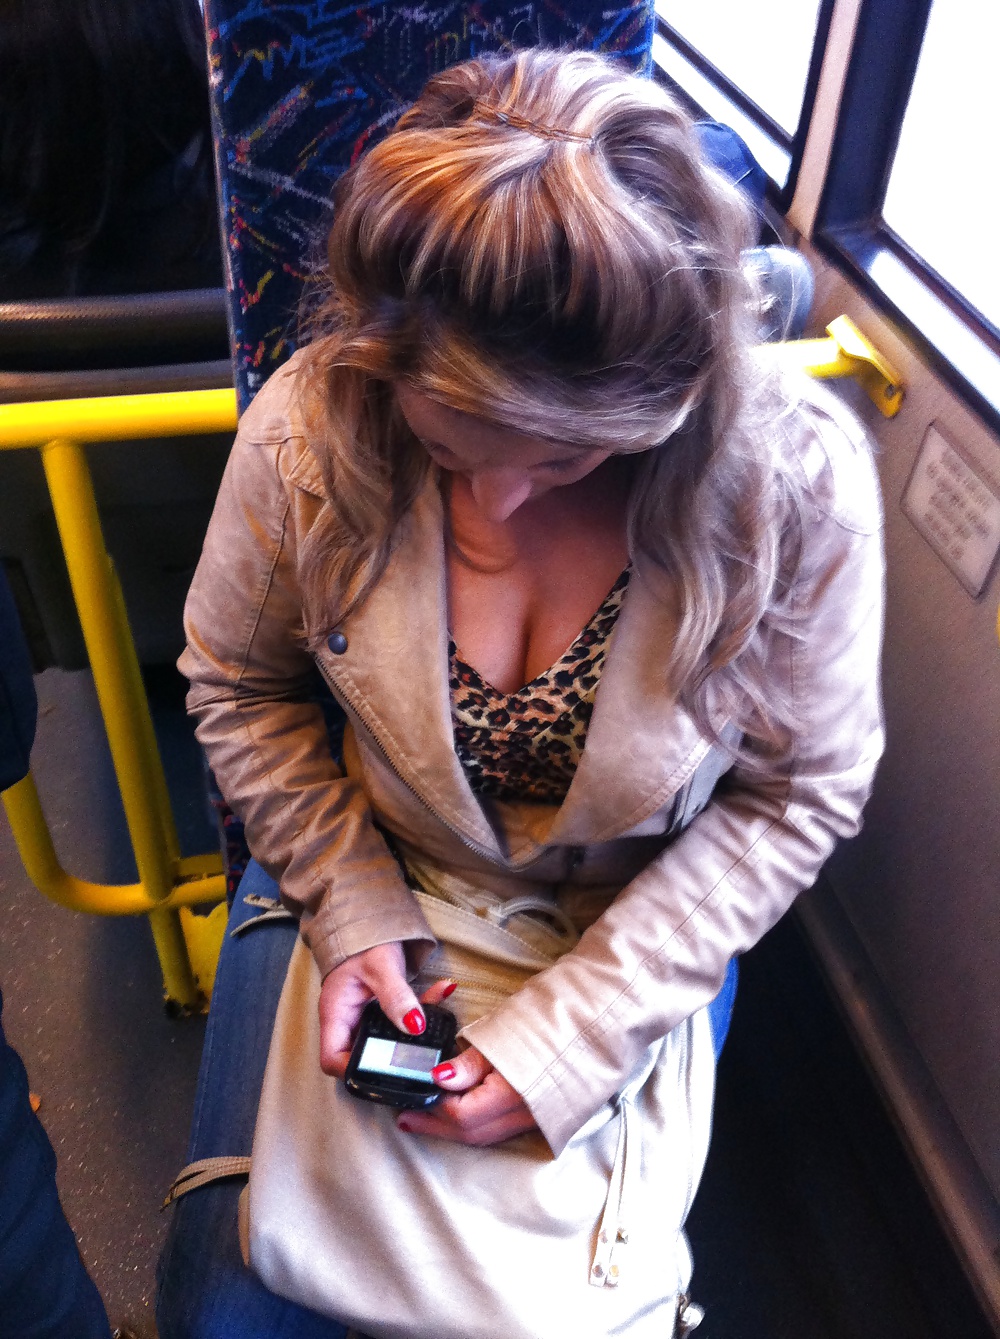 Perving on the bus #32064834